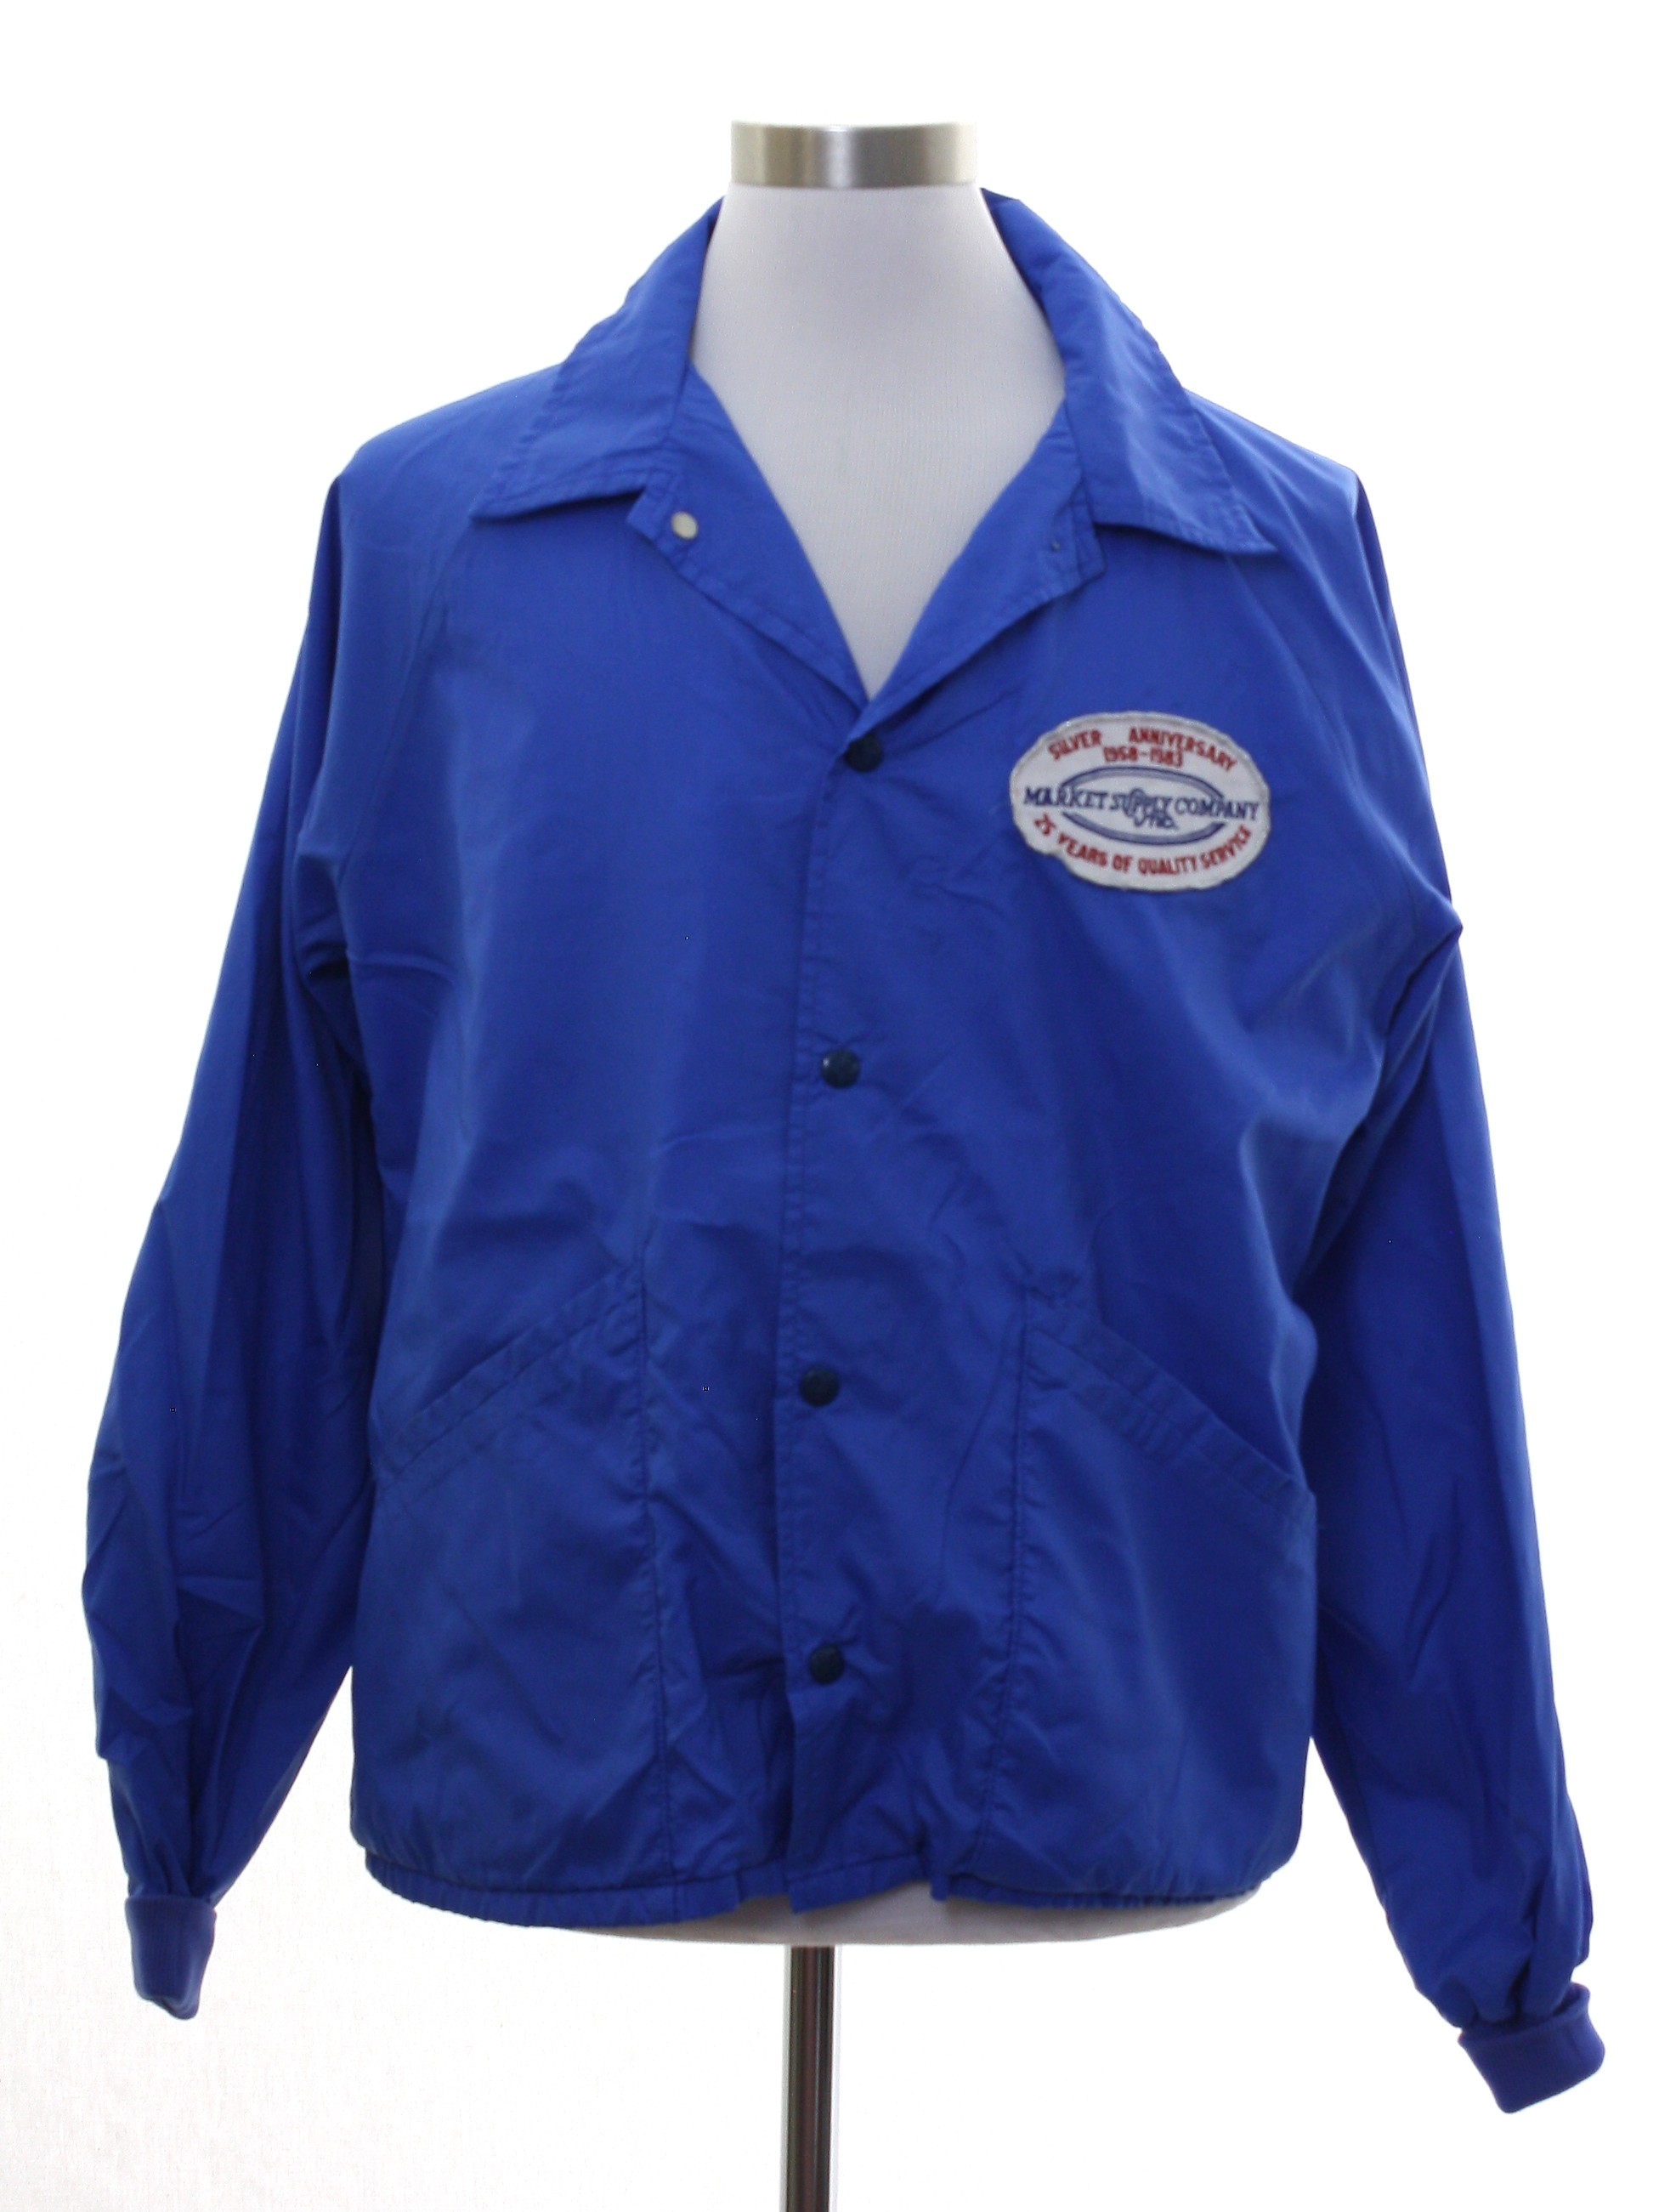 Eighties Vintage Jacket: Early 80s -Forresters- Mens blue nylon shell ...